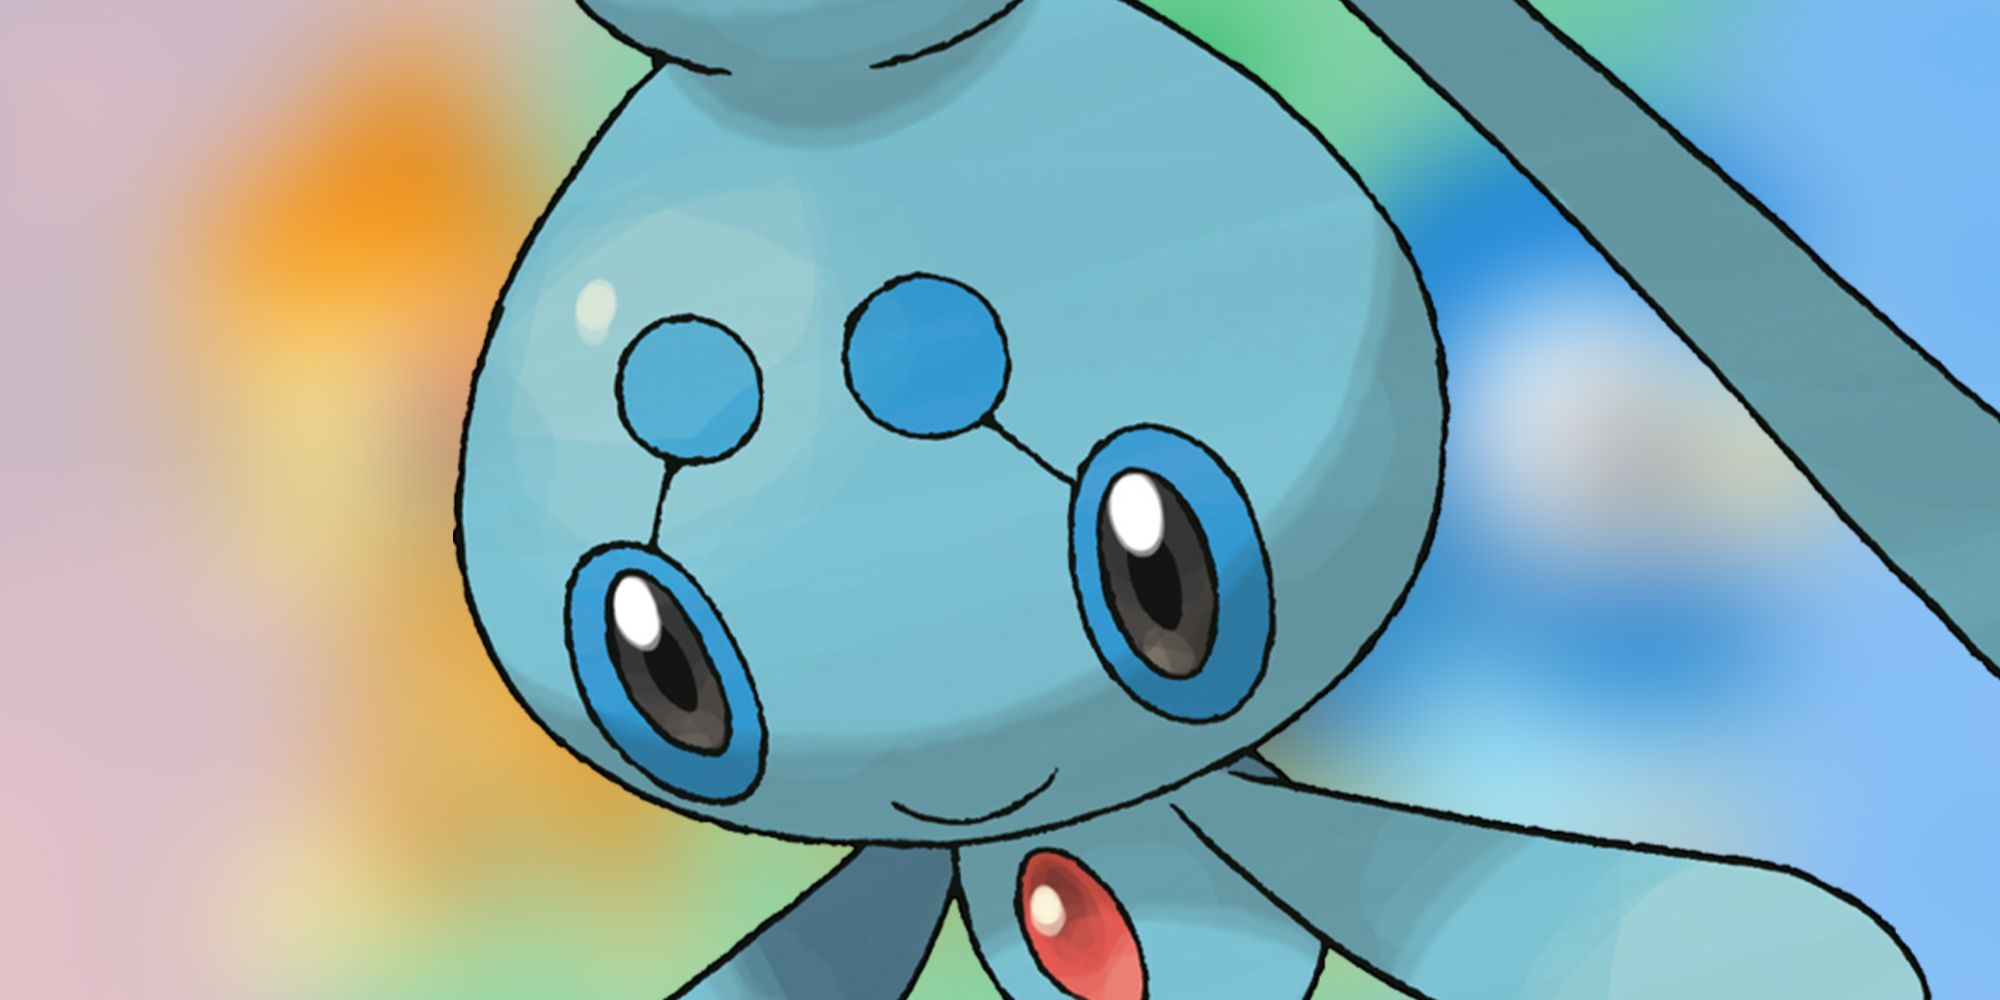 How to get Manaphy Egg and Phione in Pokémon Brilliant Diamond and Shining  Pearl